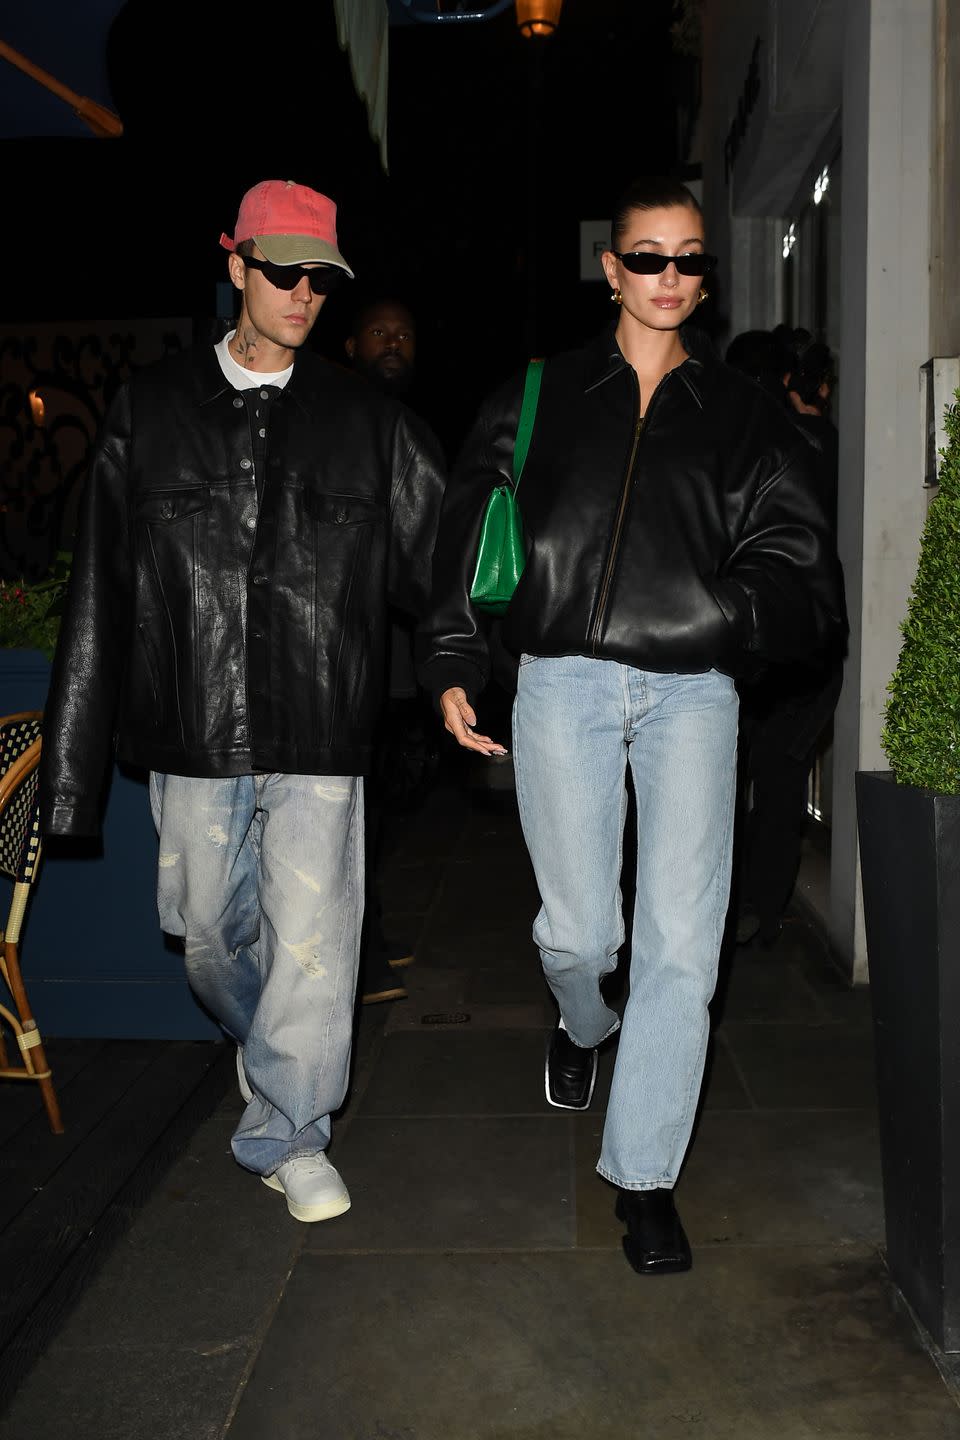 london, united kingdom may 16 hailey bieber and justin bieber is seen at daphnes restaurant on may 16, 2023 in london, united kingdom photo by megagc images